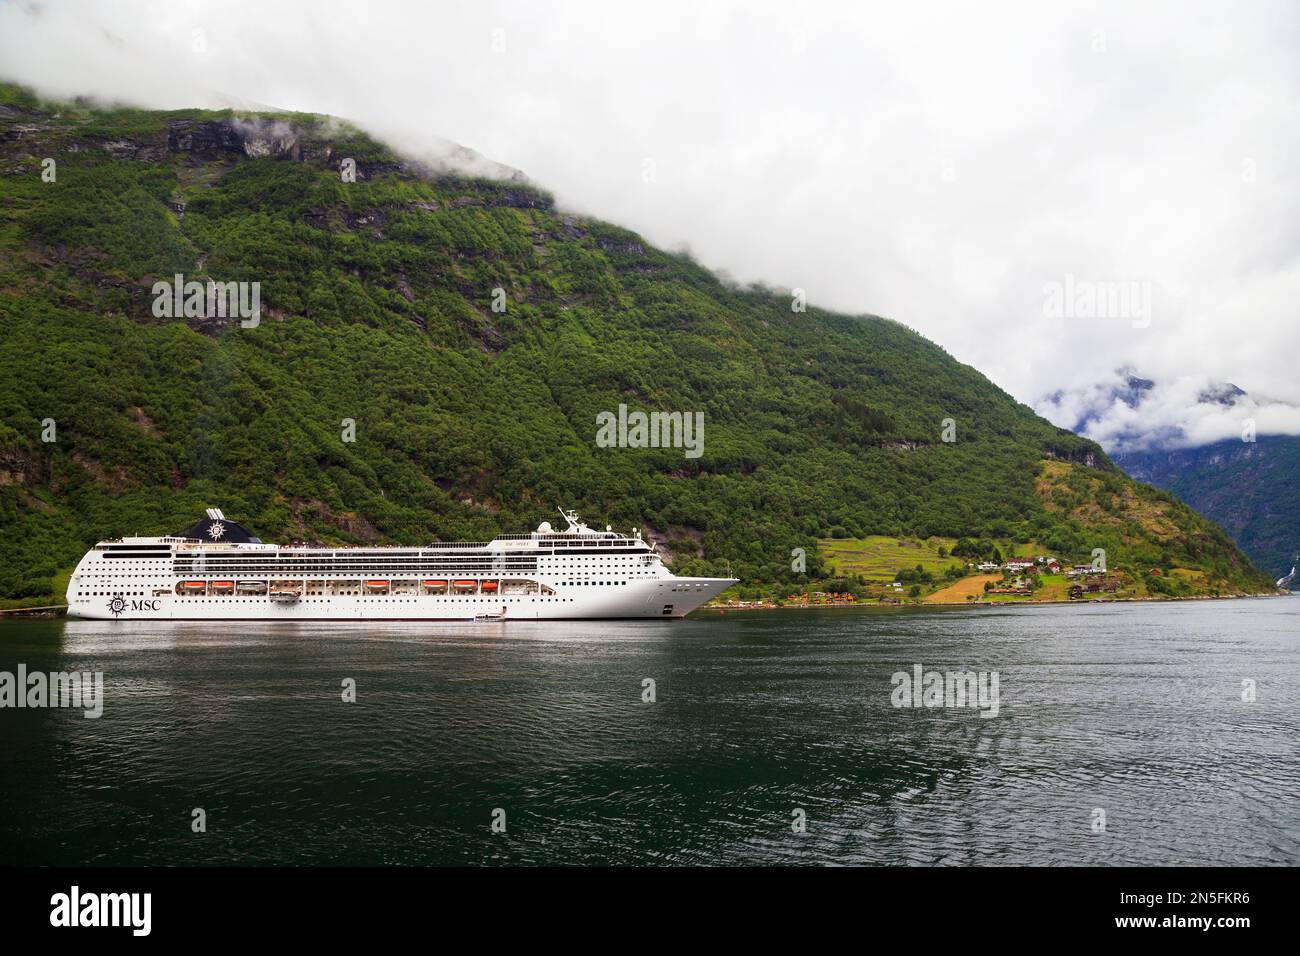 GEIRANGER, NORWAY - JULY 6, 2016: The liner MSC Opera is at anchor in Geiranger Fjord near the town of Geiranger. Stock Photo